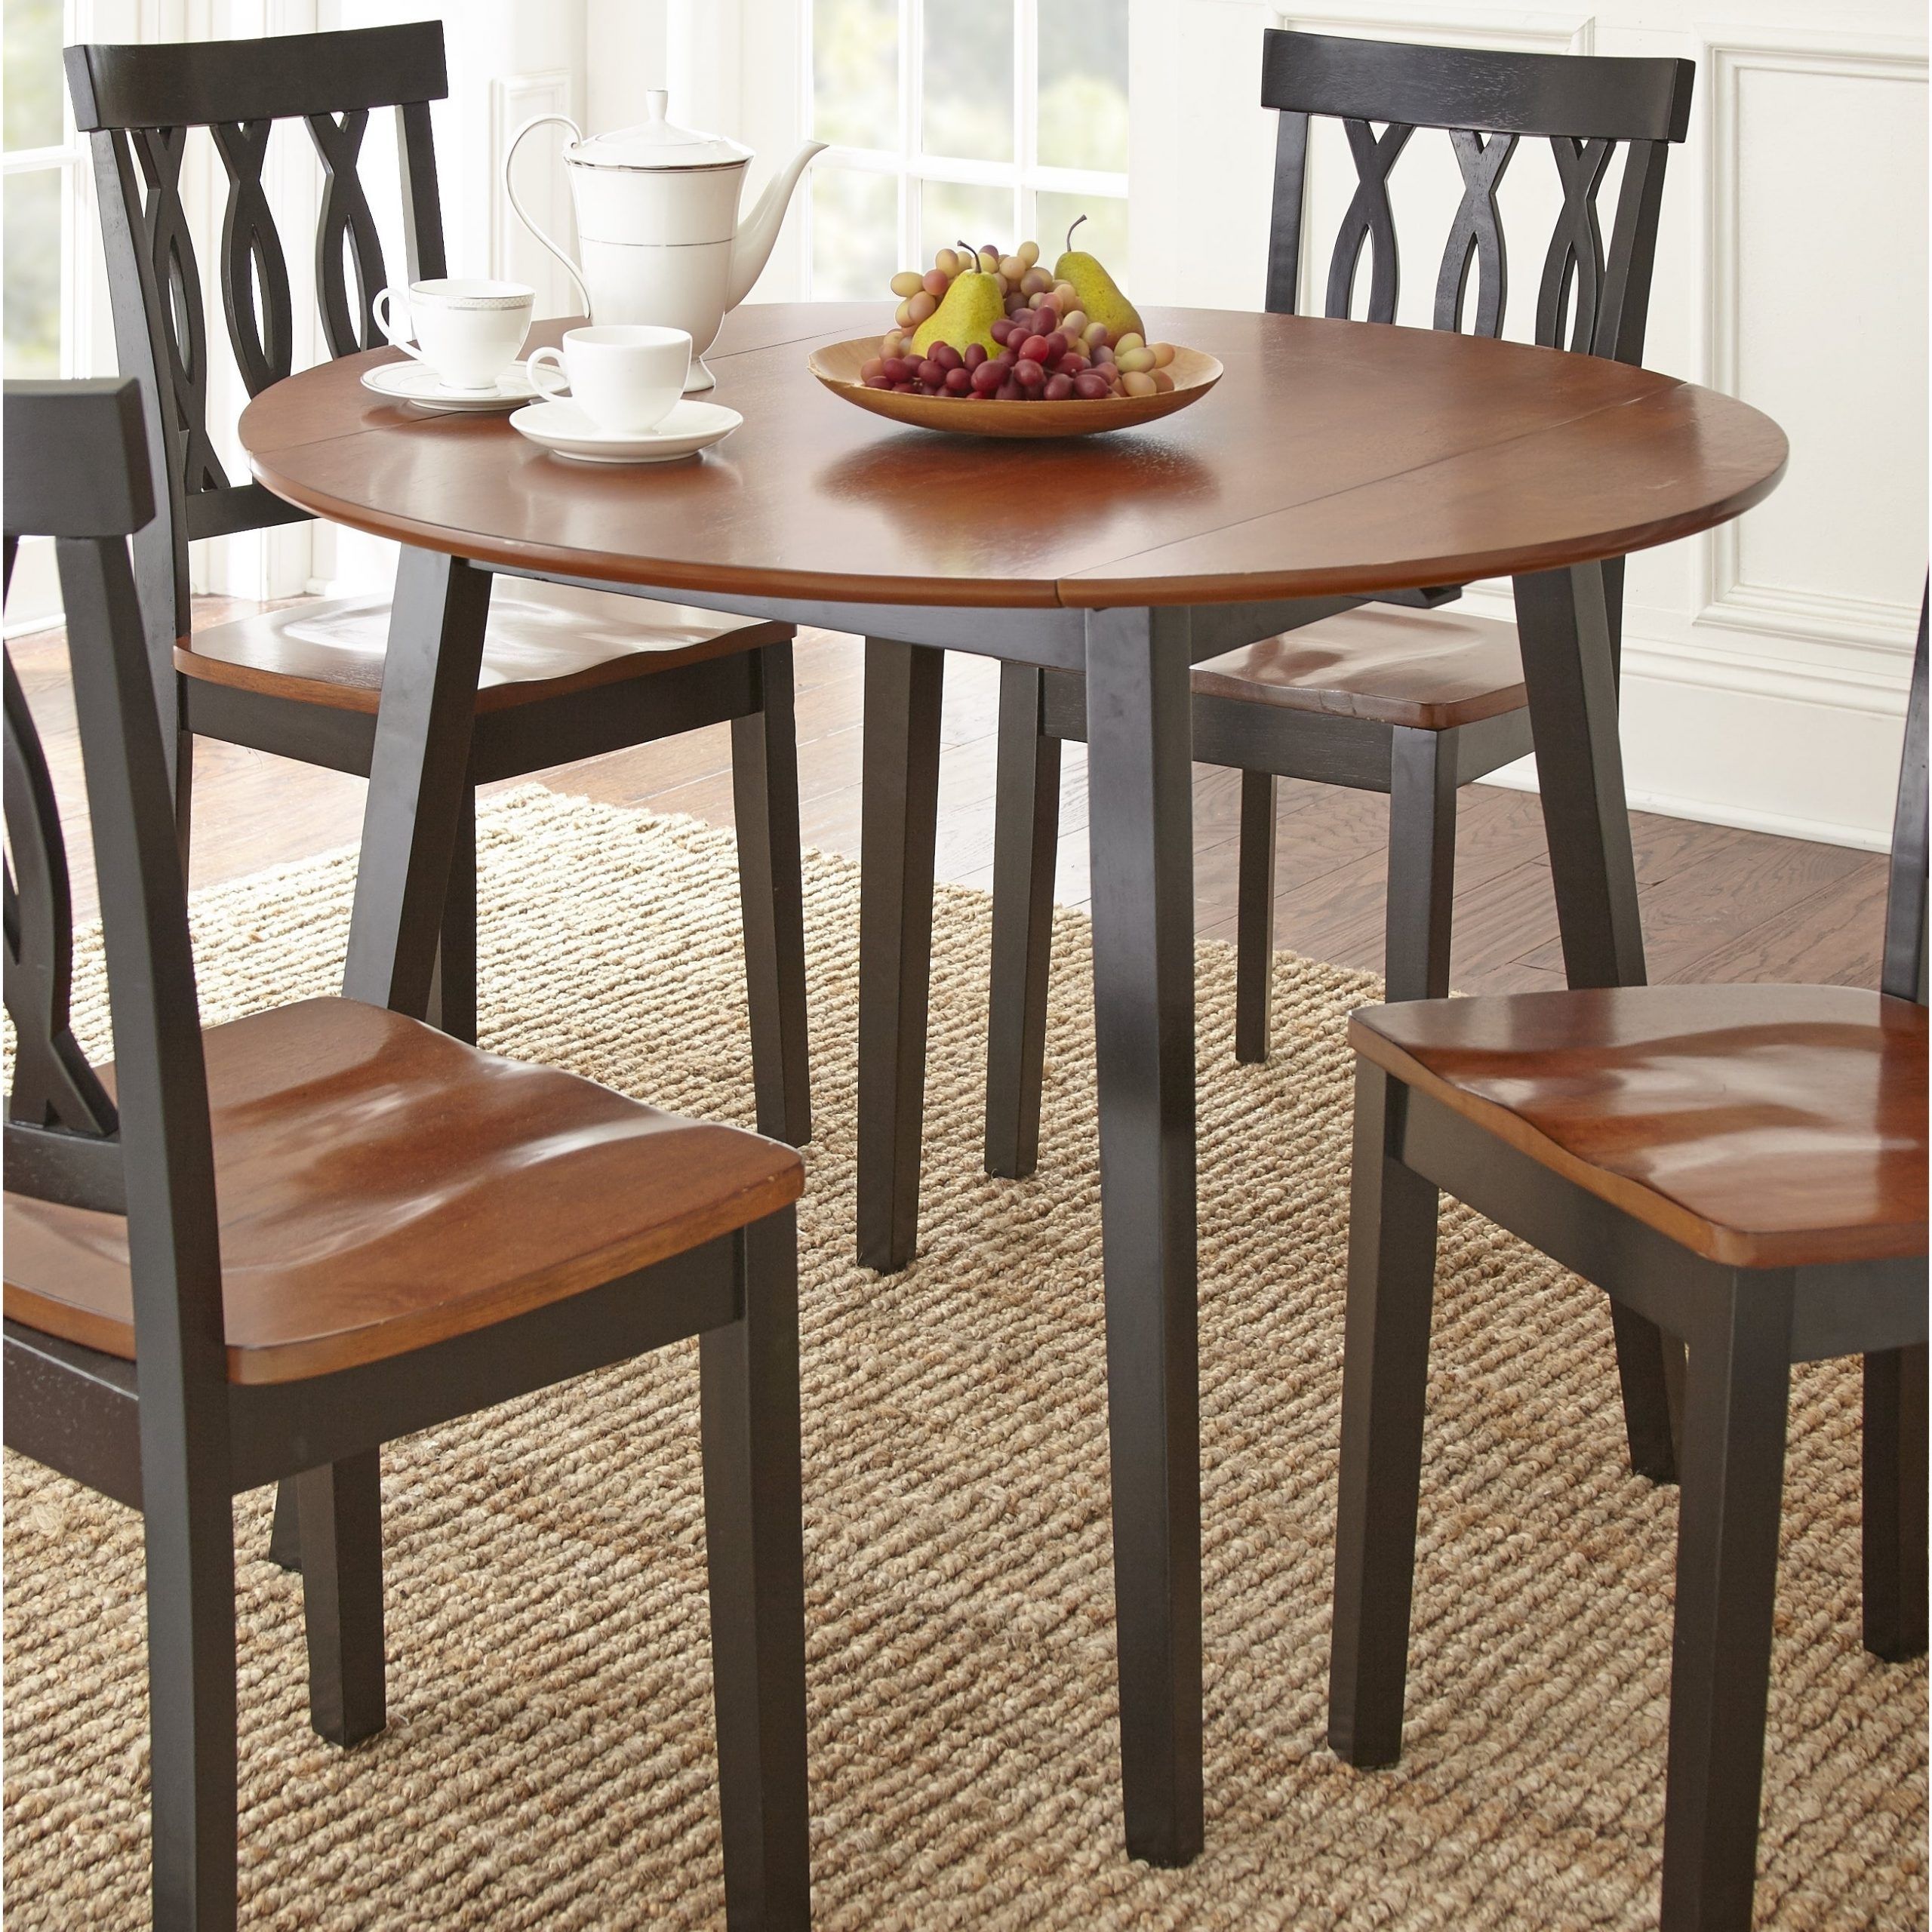 Favorite Greyson Living Abbey Drop Leaf Dining Table – Black Cherry Finish Throughout Transitional 4 Seating Double Drop Leaf Casual Dining Tables (Photo 29 of 30)